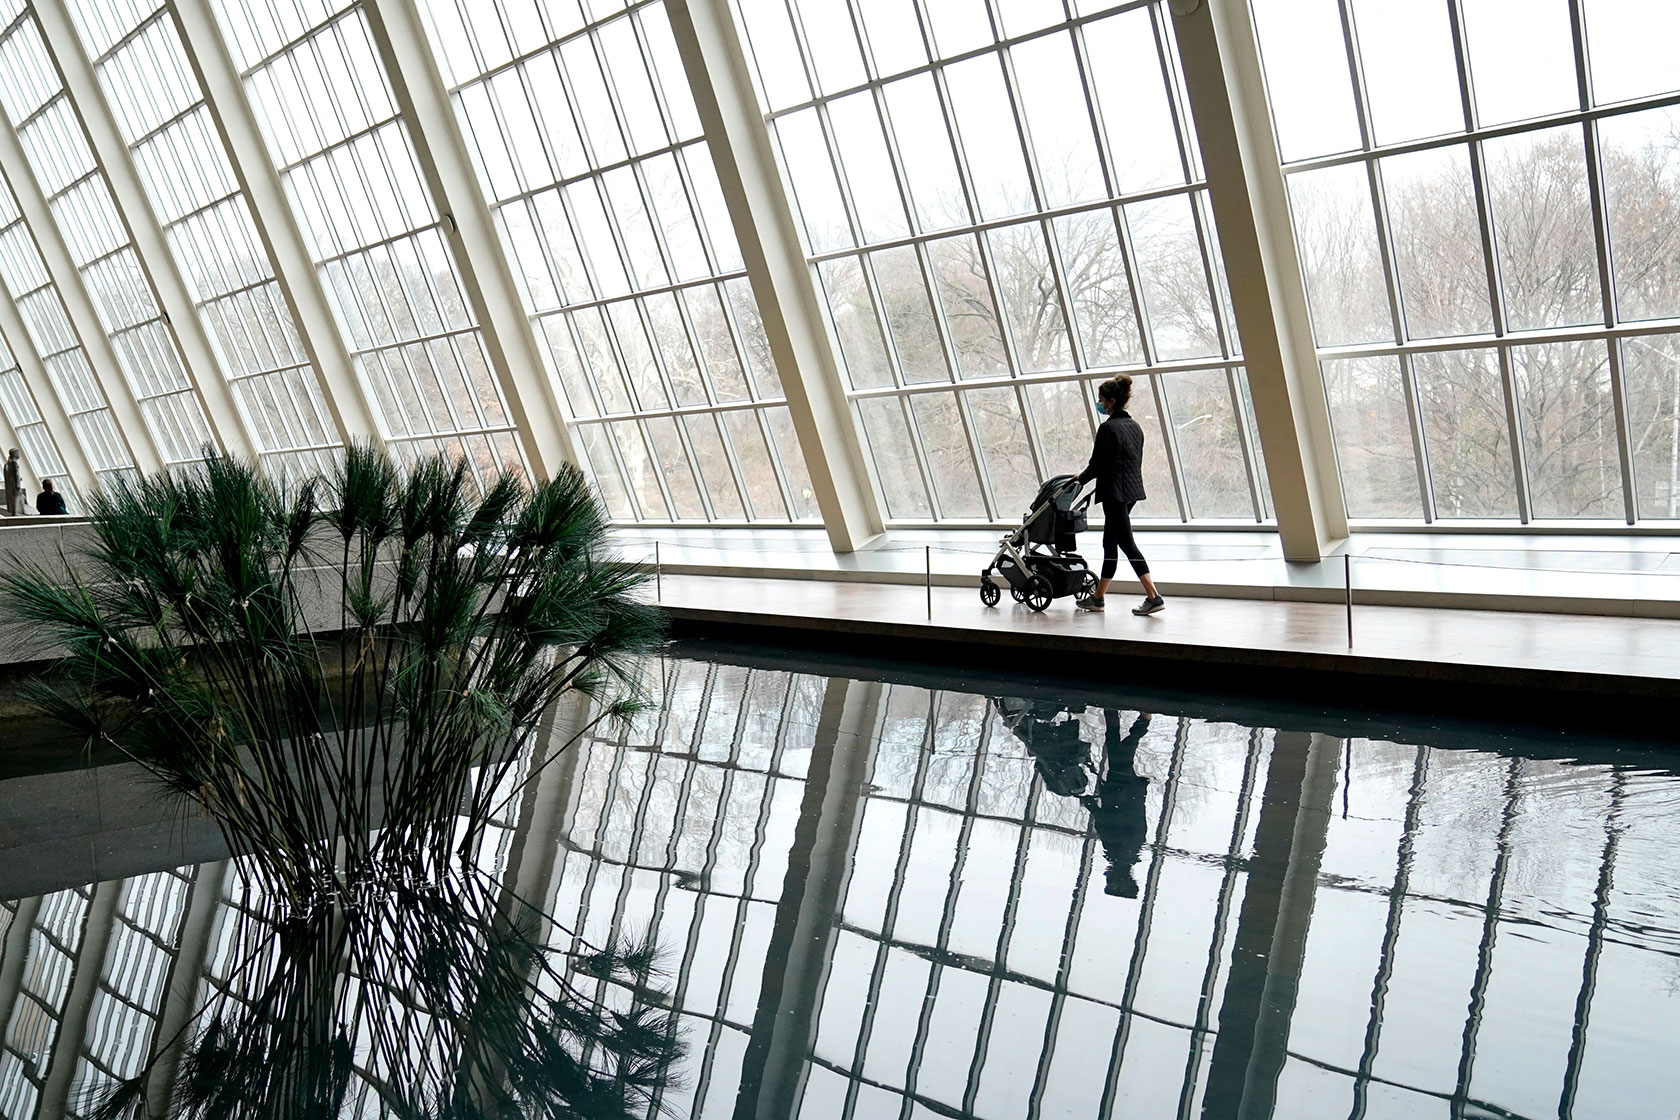 A woman pushing a stroller walks through an atrium with light pouring in and a small pool reflecting plant life